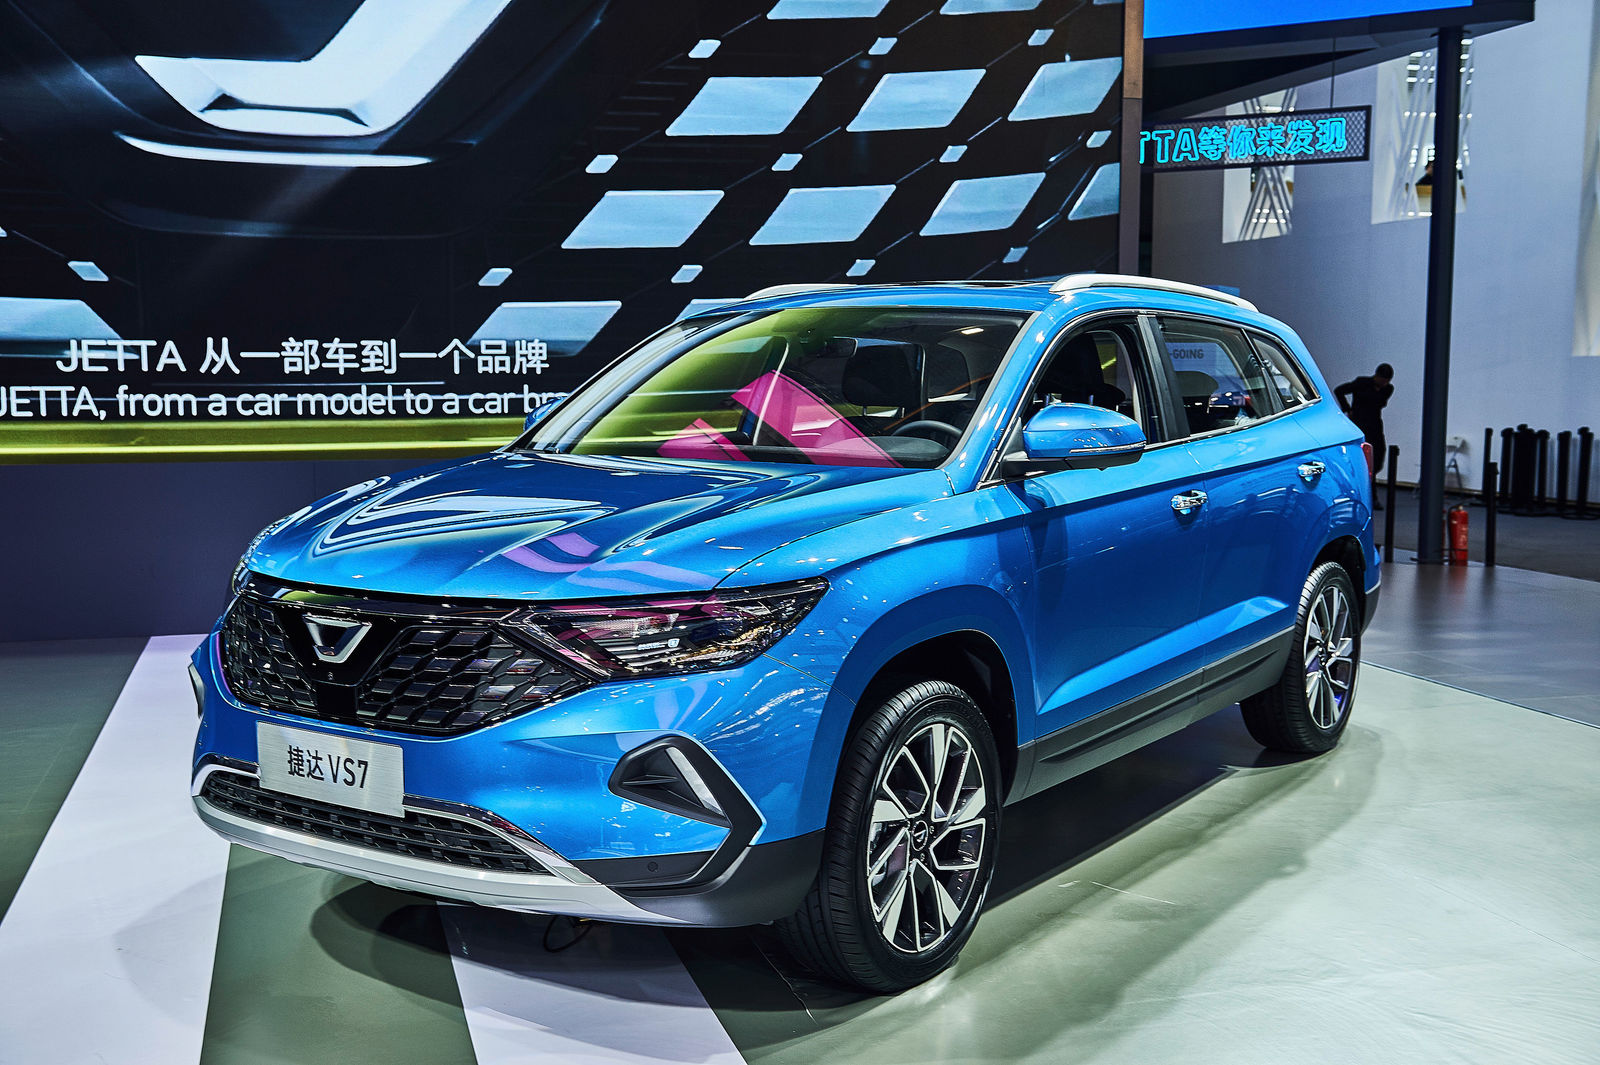 JETTA successfully offers entry-level individual mobility in China